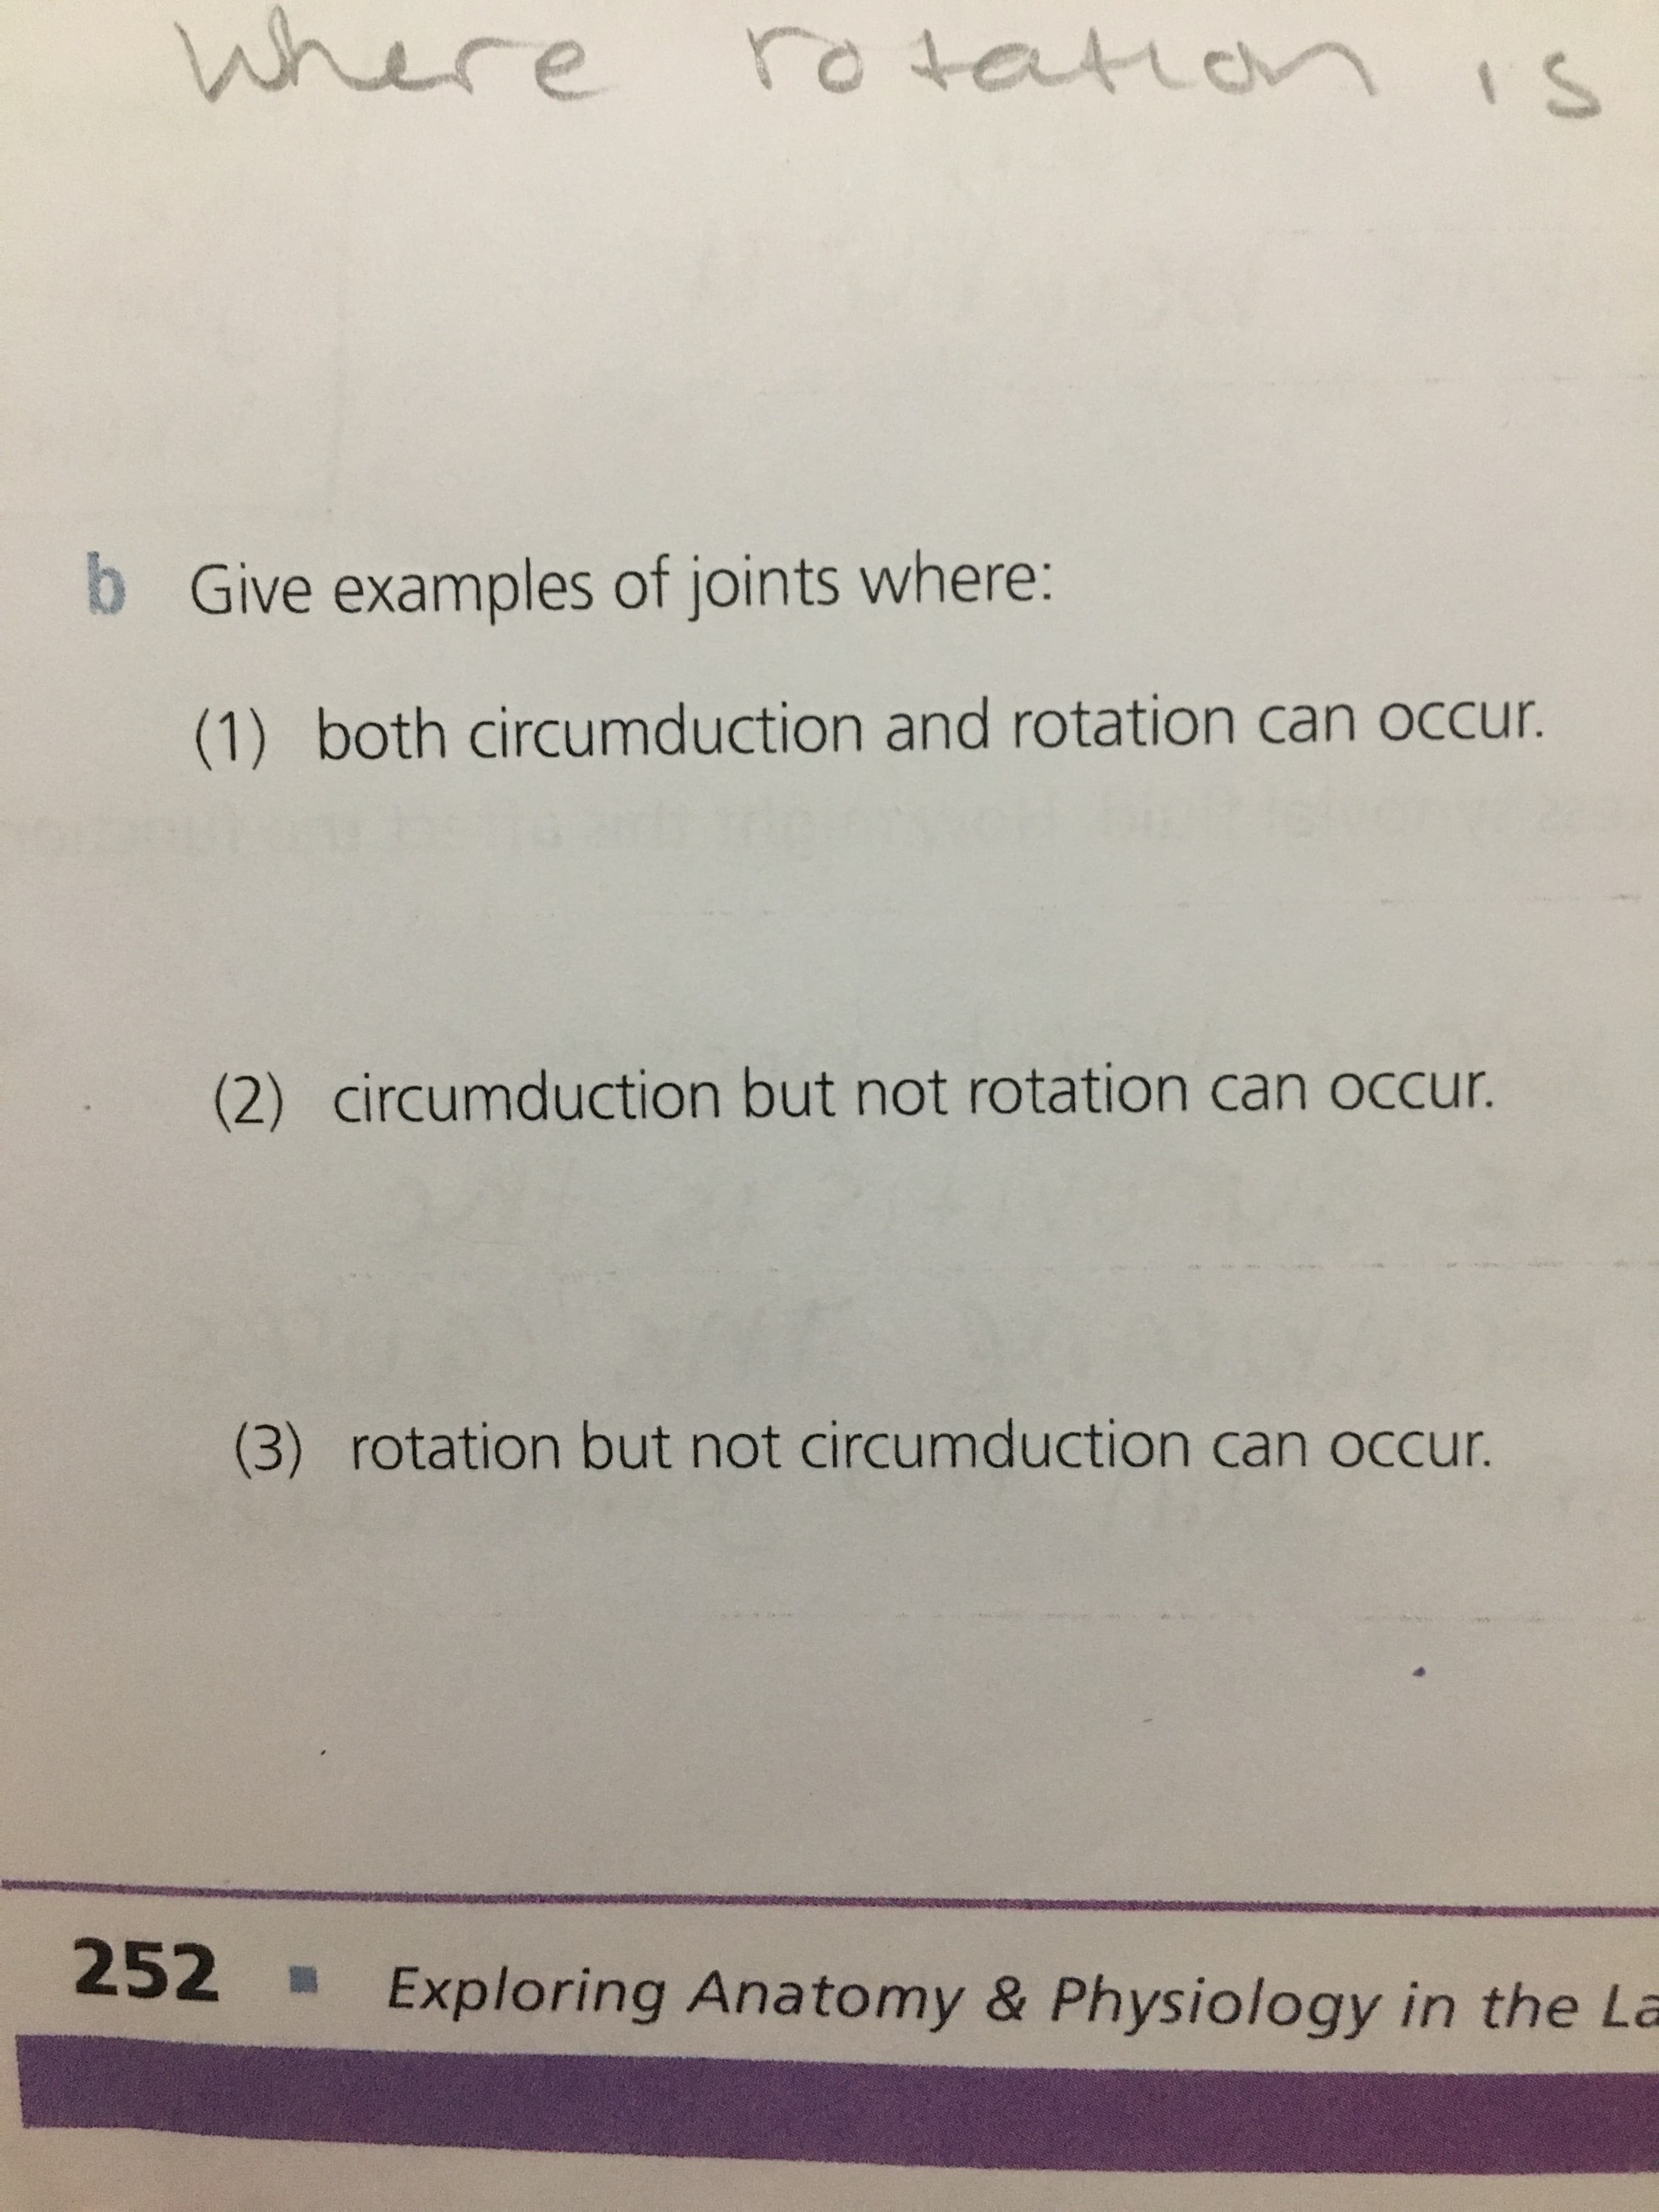 Where
ro tarar
IS
b
Give examples of joints where:
(1) both circumduction and rotation can occur.
circumduction but not rotation can occur.
(2)
(3) rotation but not circumduction can occur.
252
Exploring Anatomy & Physiology in the La
